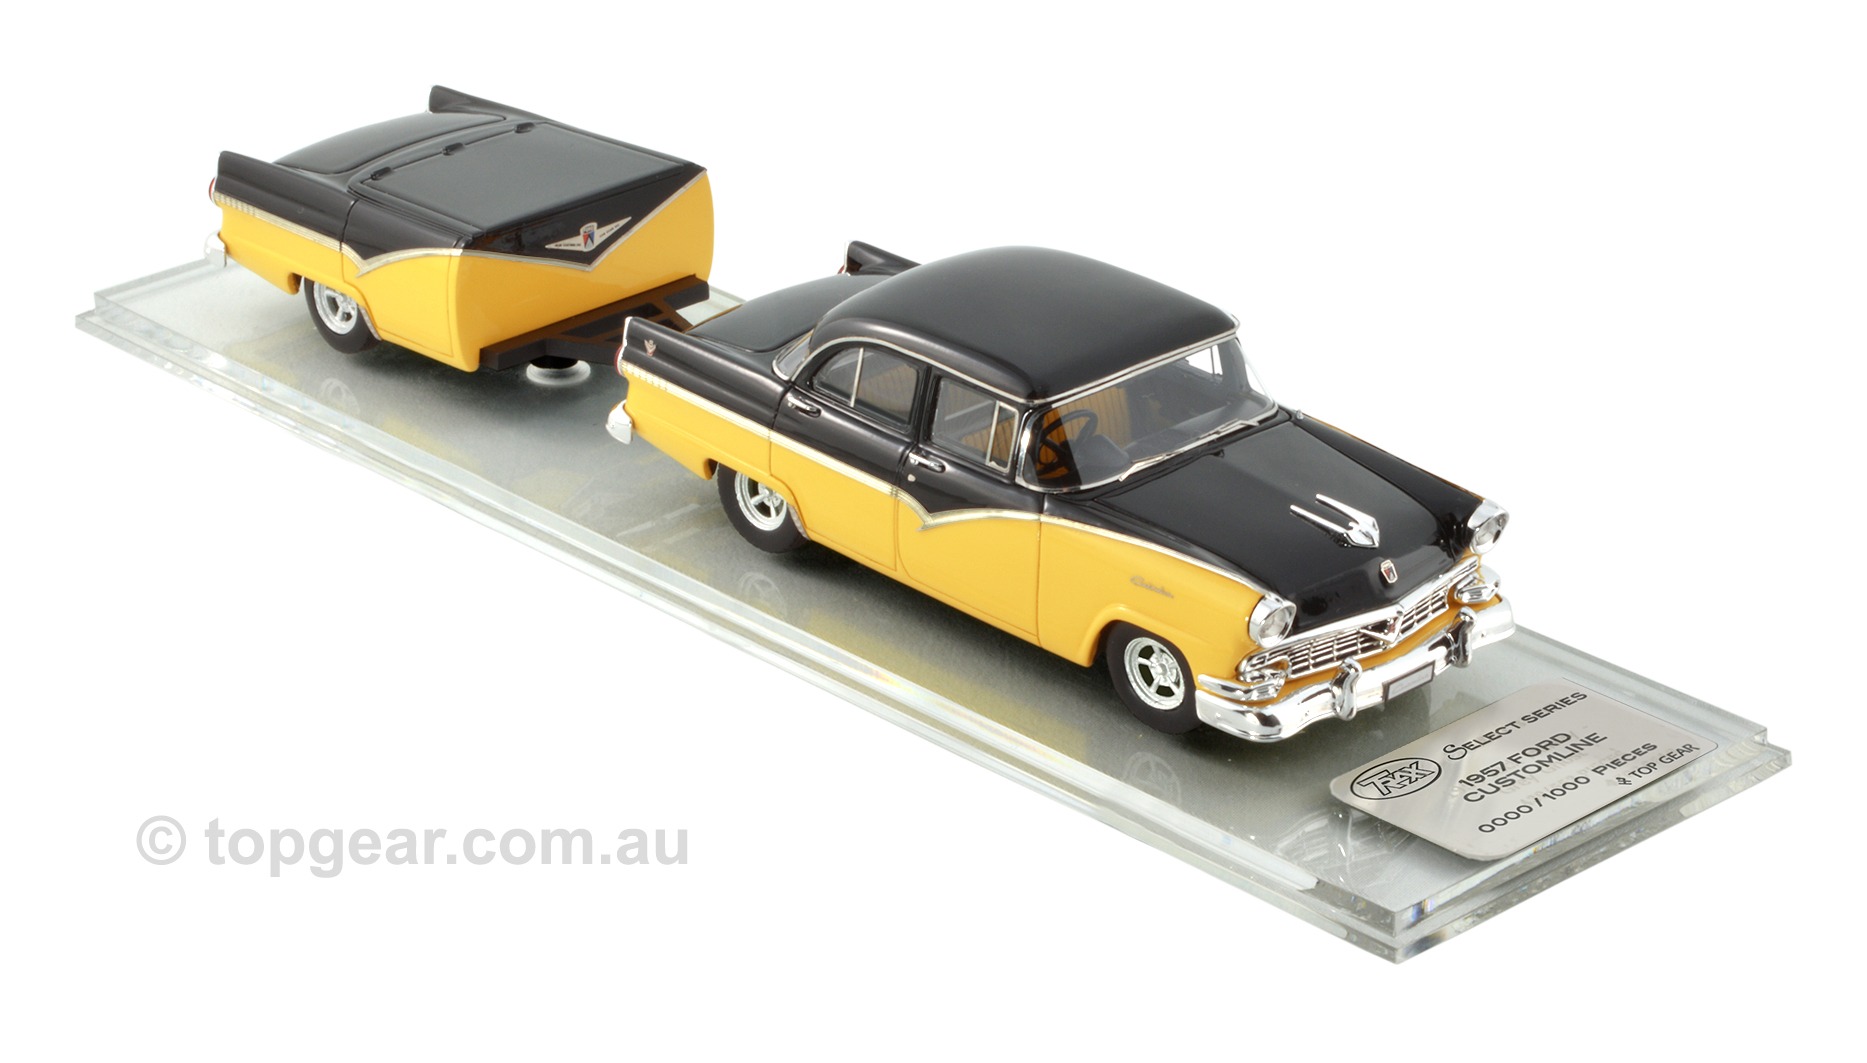 TSS22S 1957 Ford Customline With Trailer – Yellow/Black.